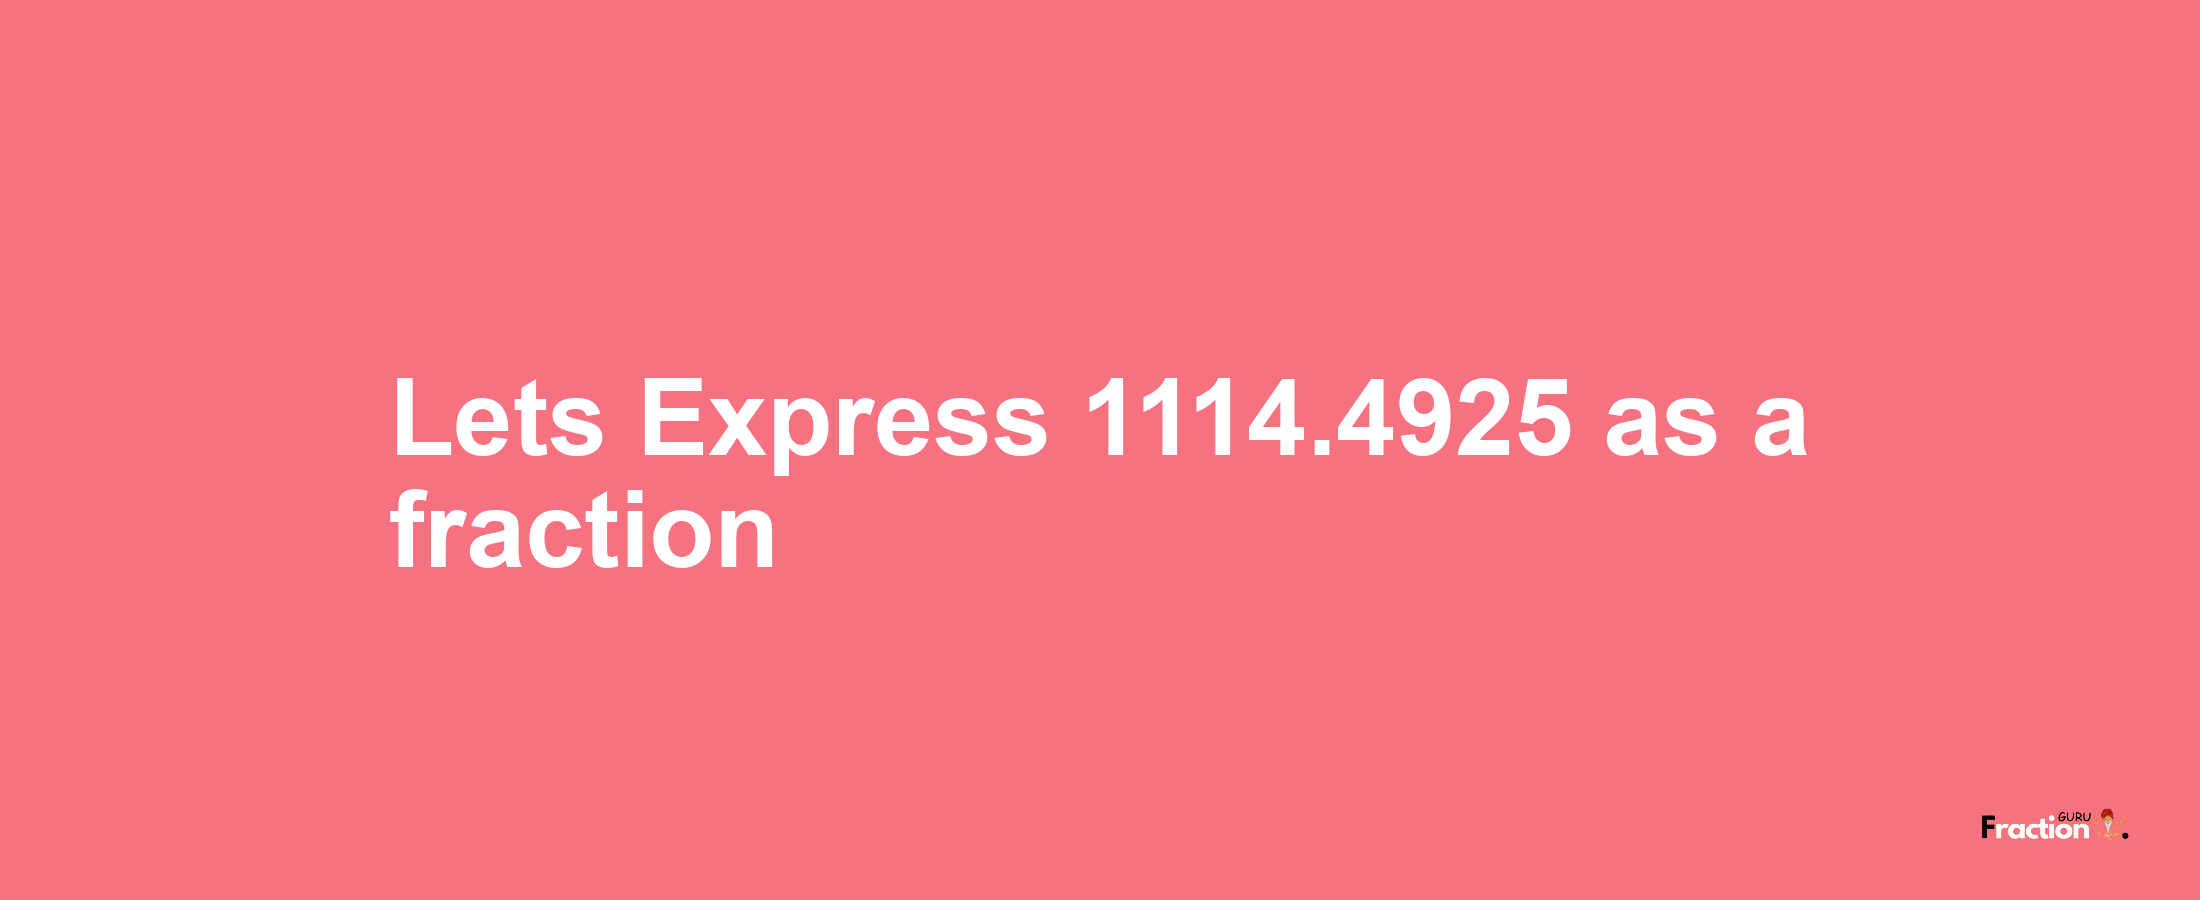 Lets Express 1114.4925 as afraction